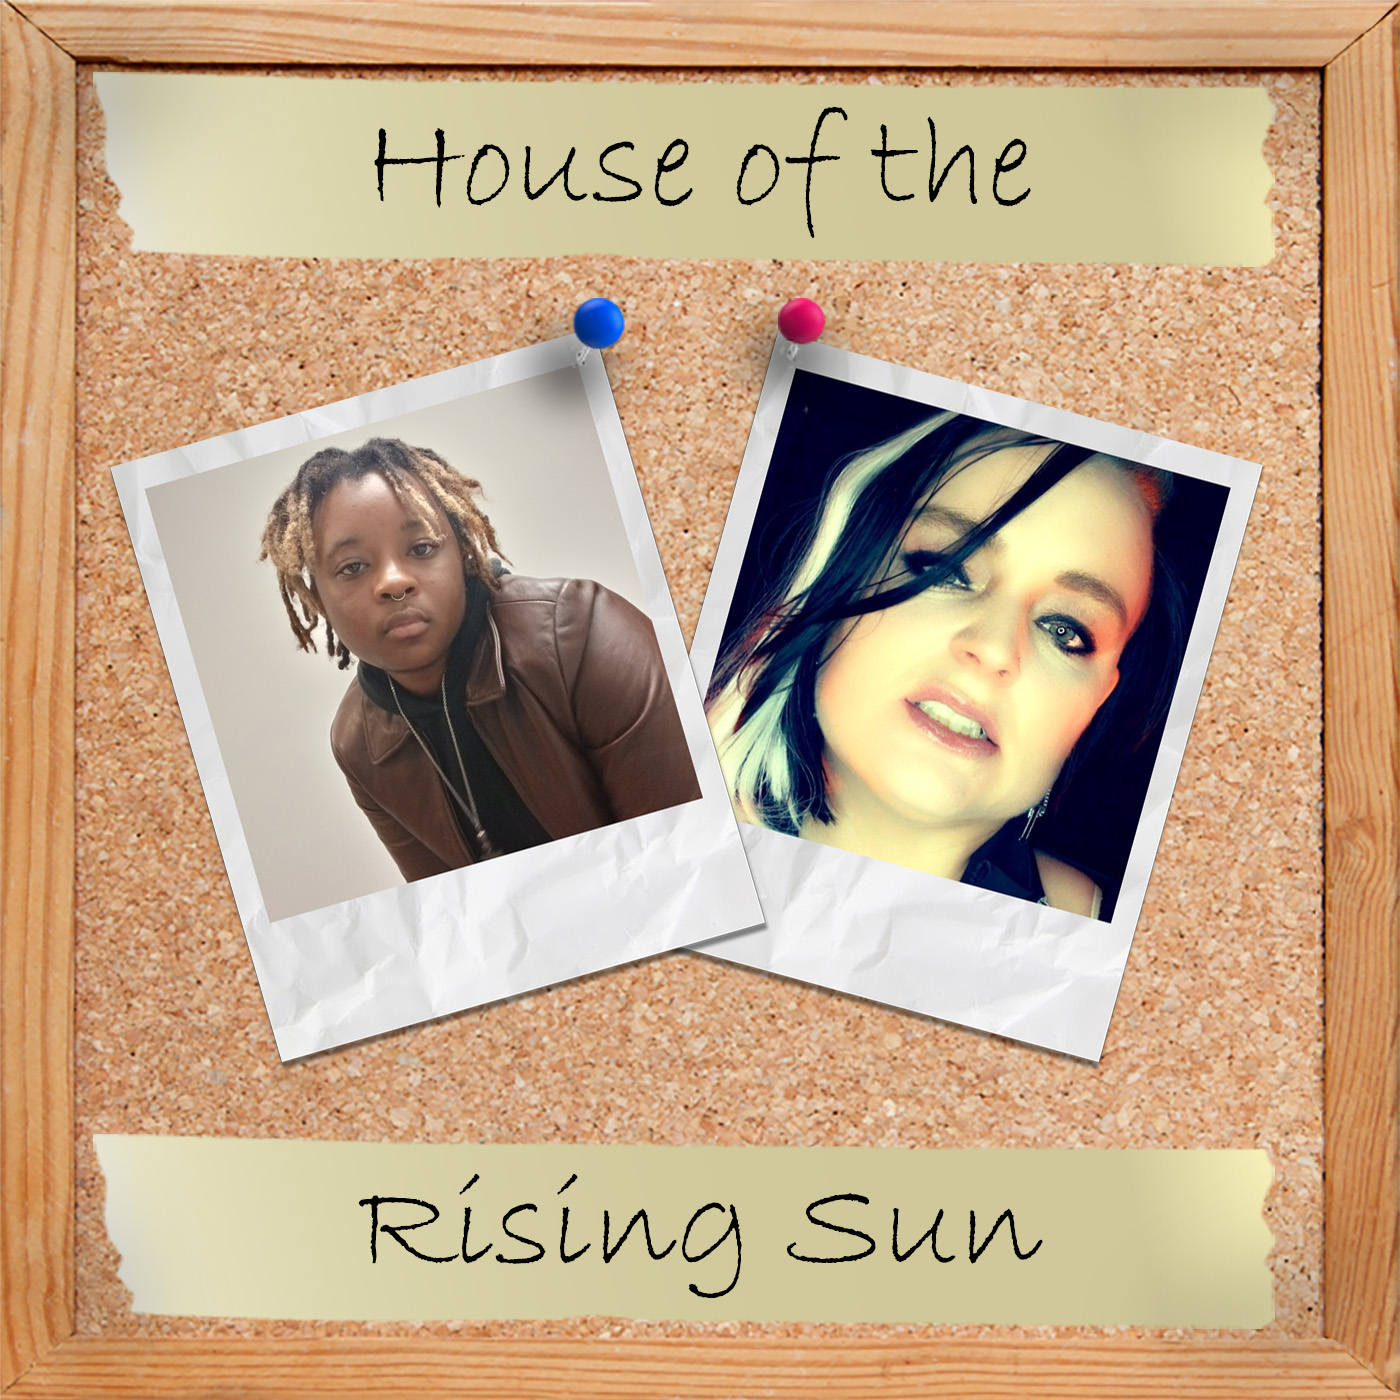 S1 Ep7: House of the Rising Sun